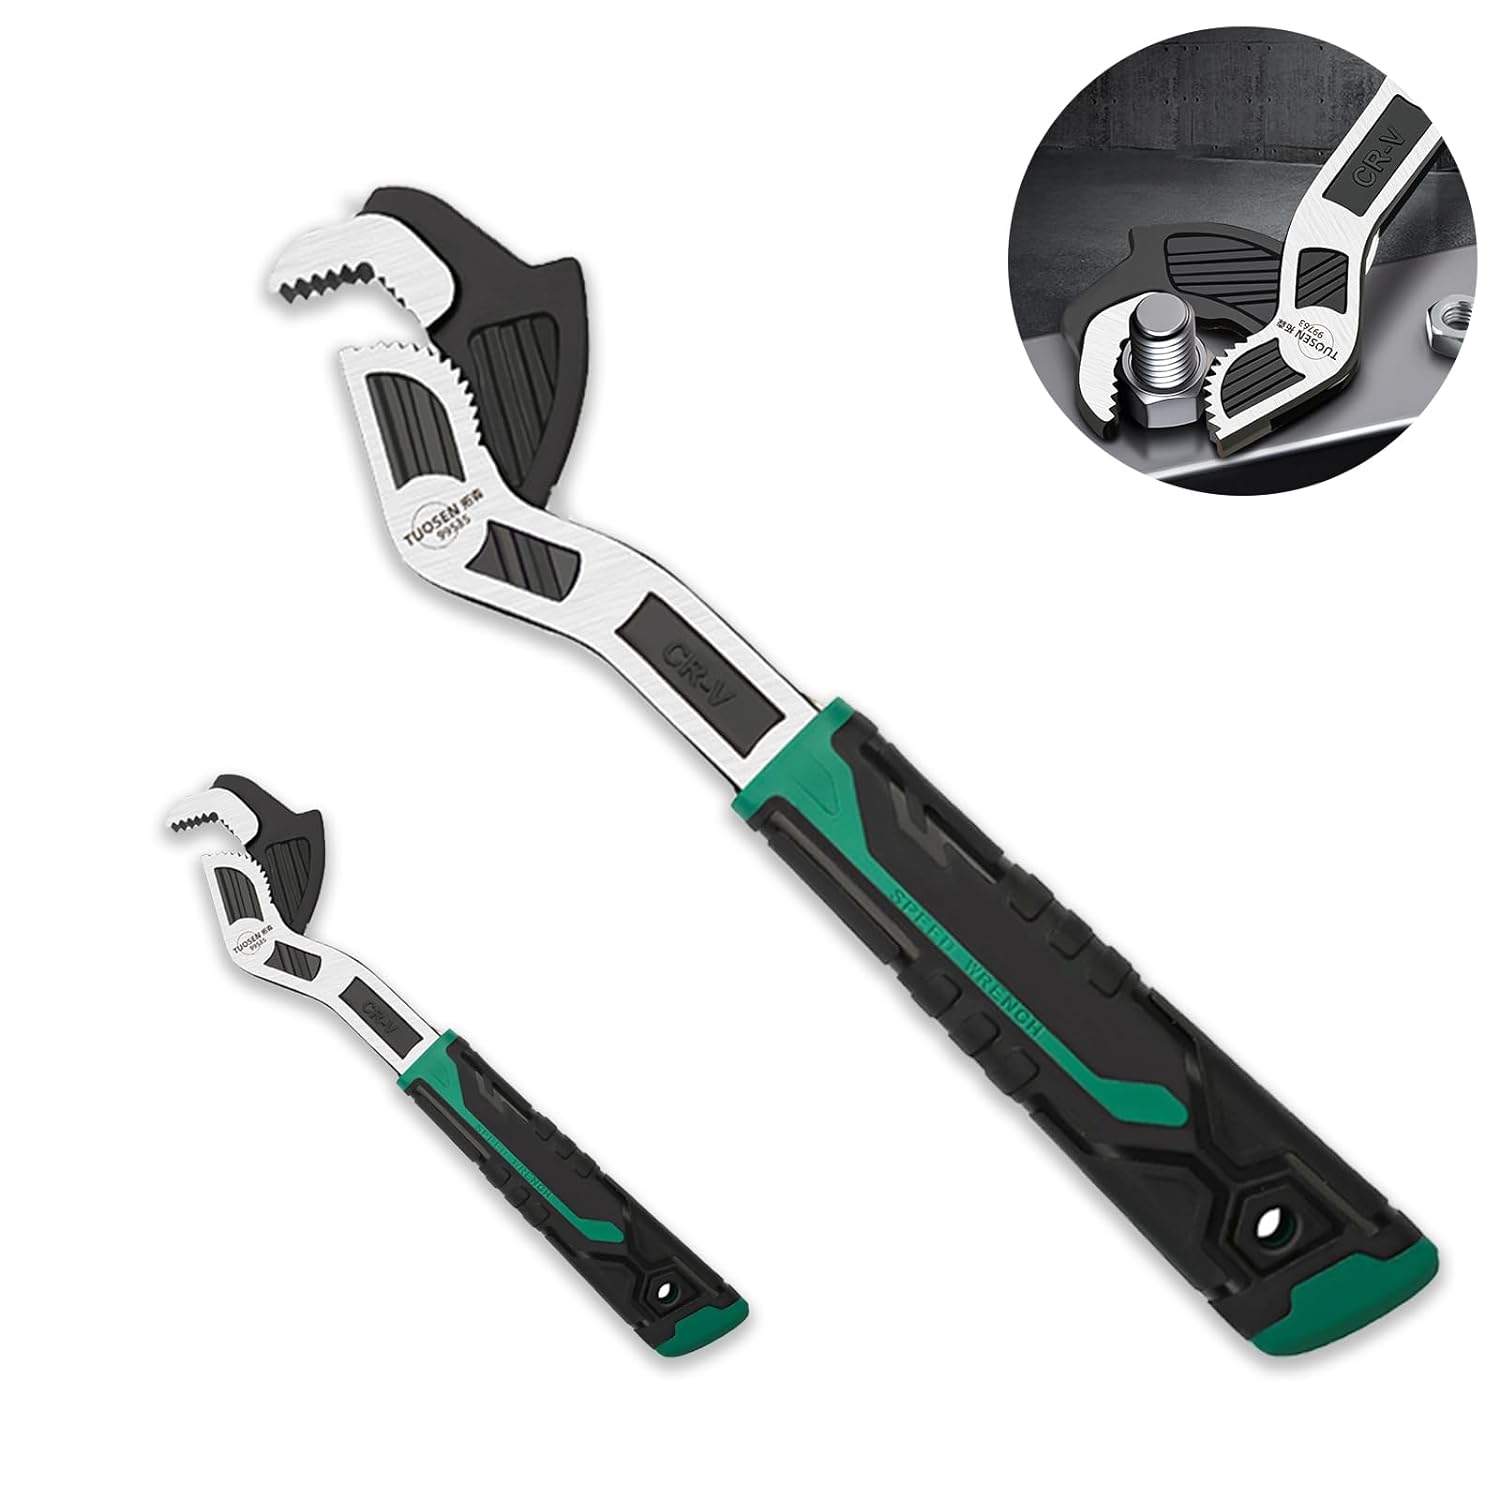 groword 2Pcs Adjustable Wrench, Auto Size Adjusting Wrench,0.6"-1.38"(15-35MM) Self-Adjusting Quick Wrench,Multi-Size Spring Adjustable Wrench,Auto Size Rapid Wrench for Car,Bicycle,Plumbing Repairs